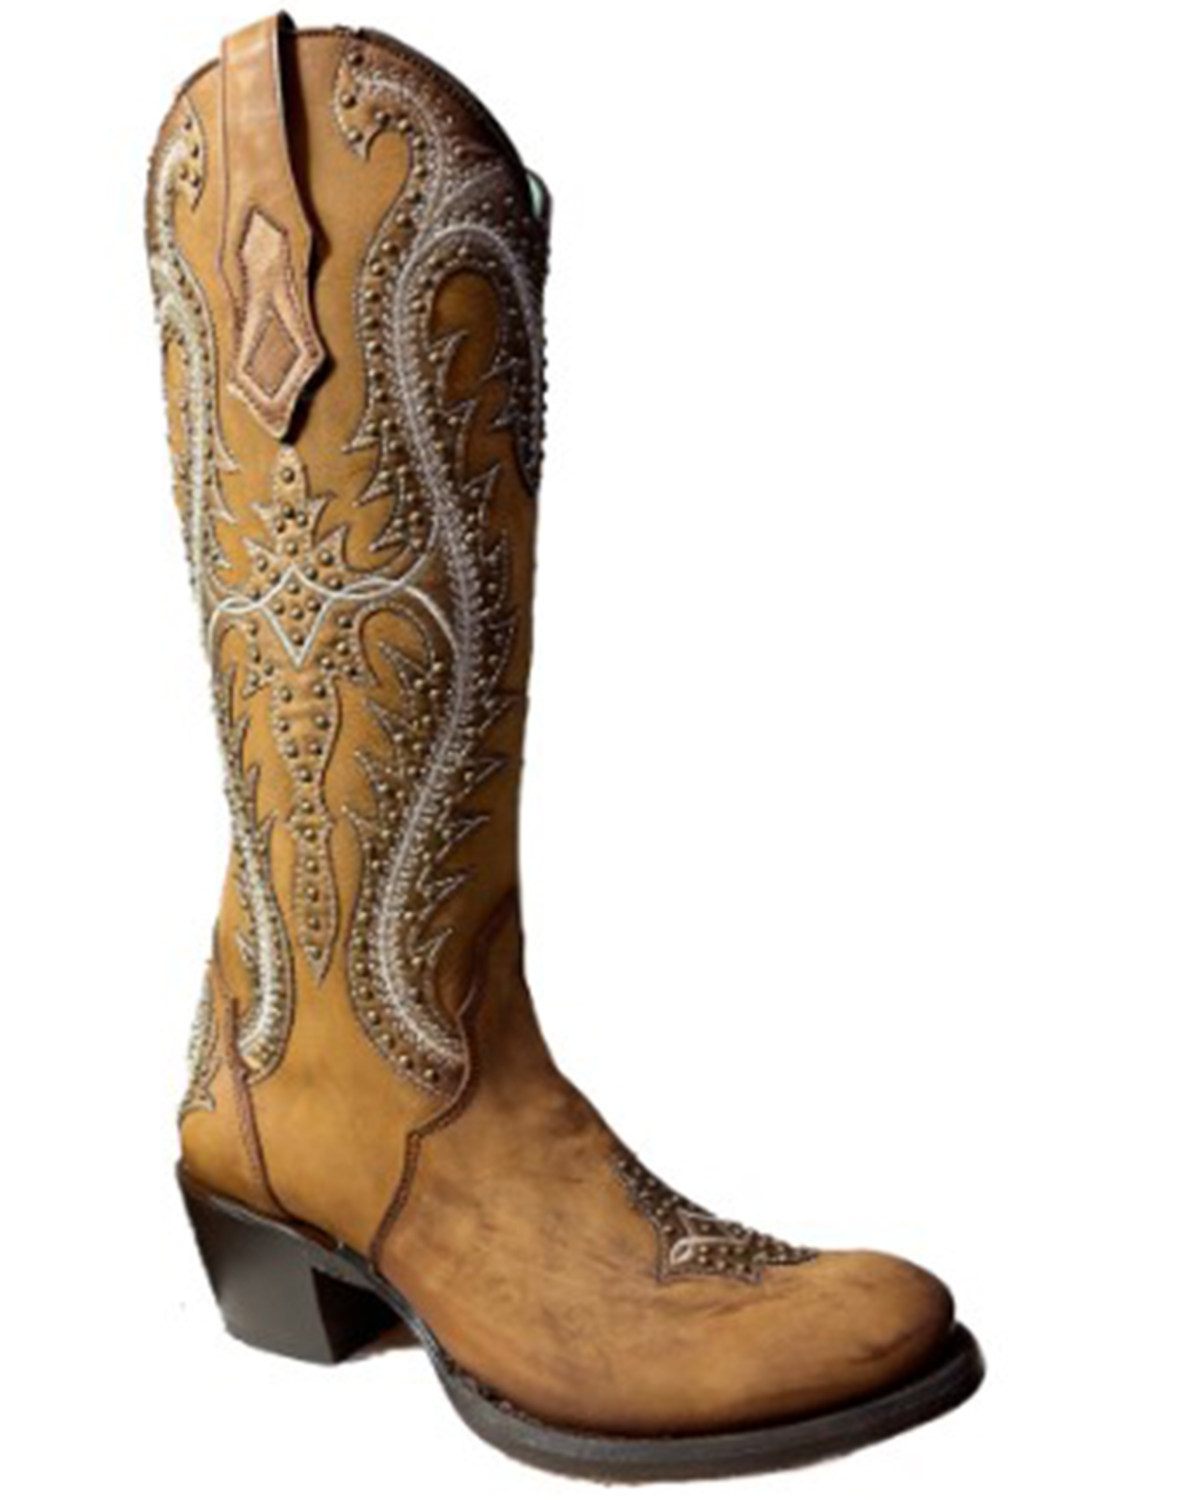 Corral Women's Shedron Embroidered & Studded Tall Western Boots - Round Toe